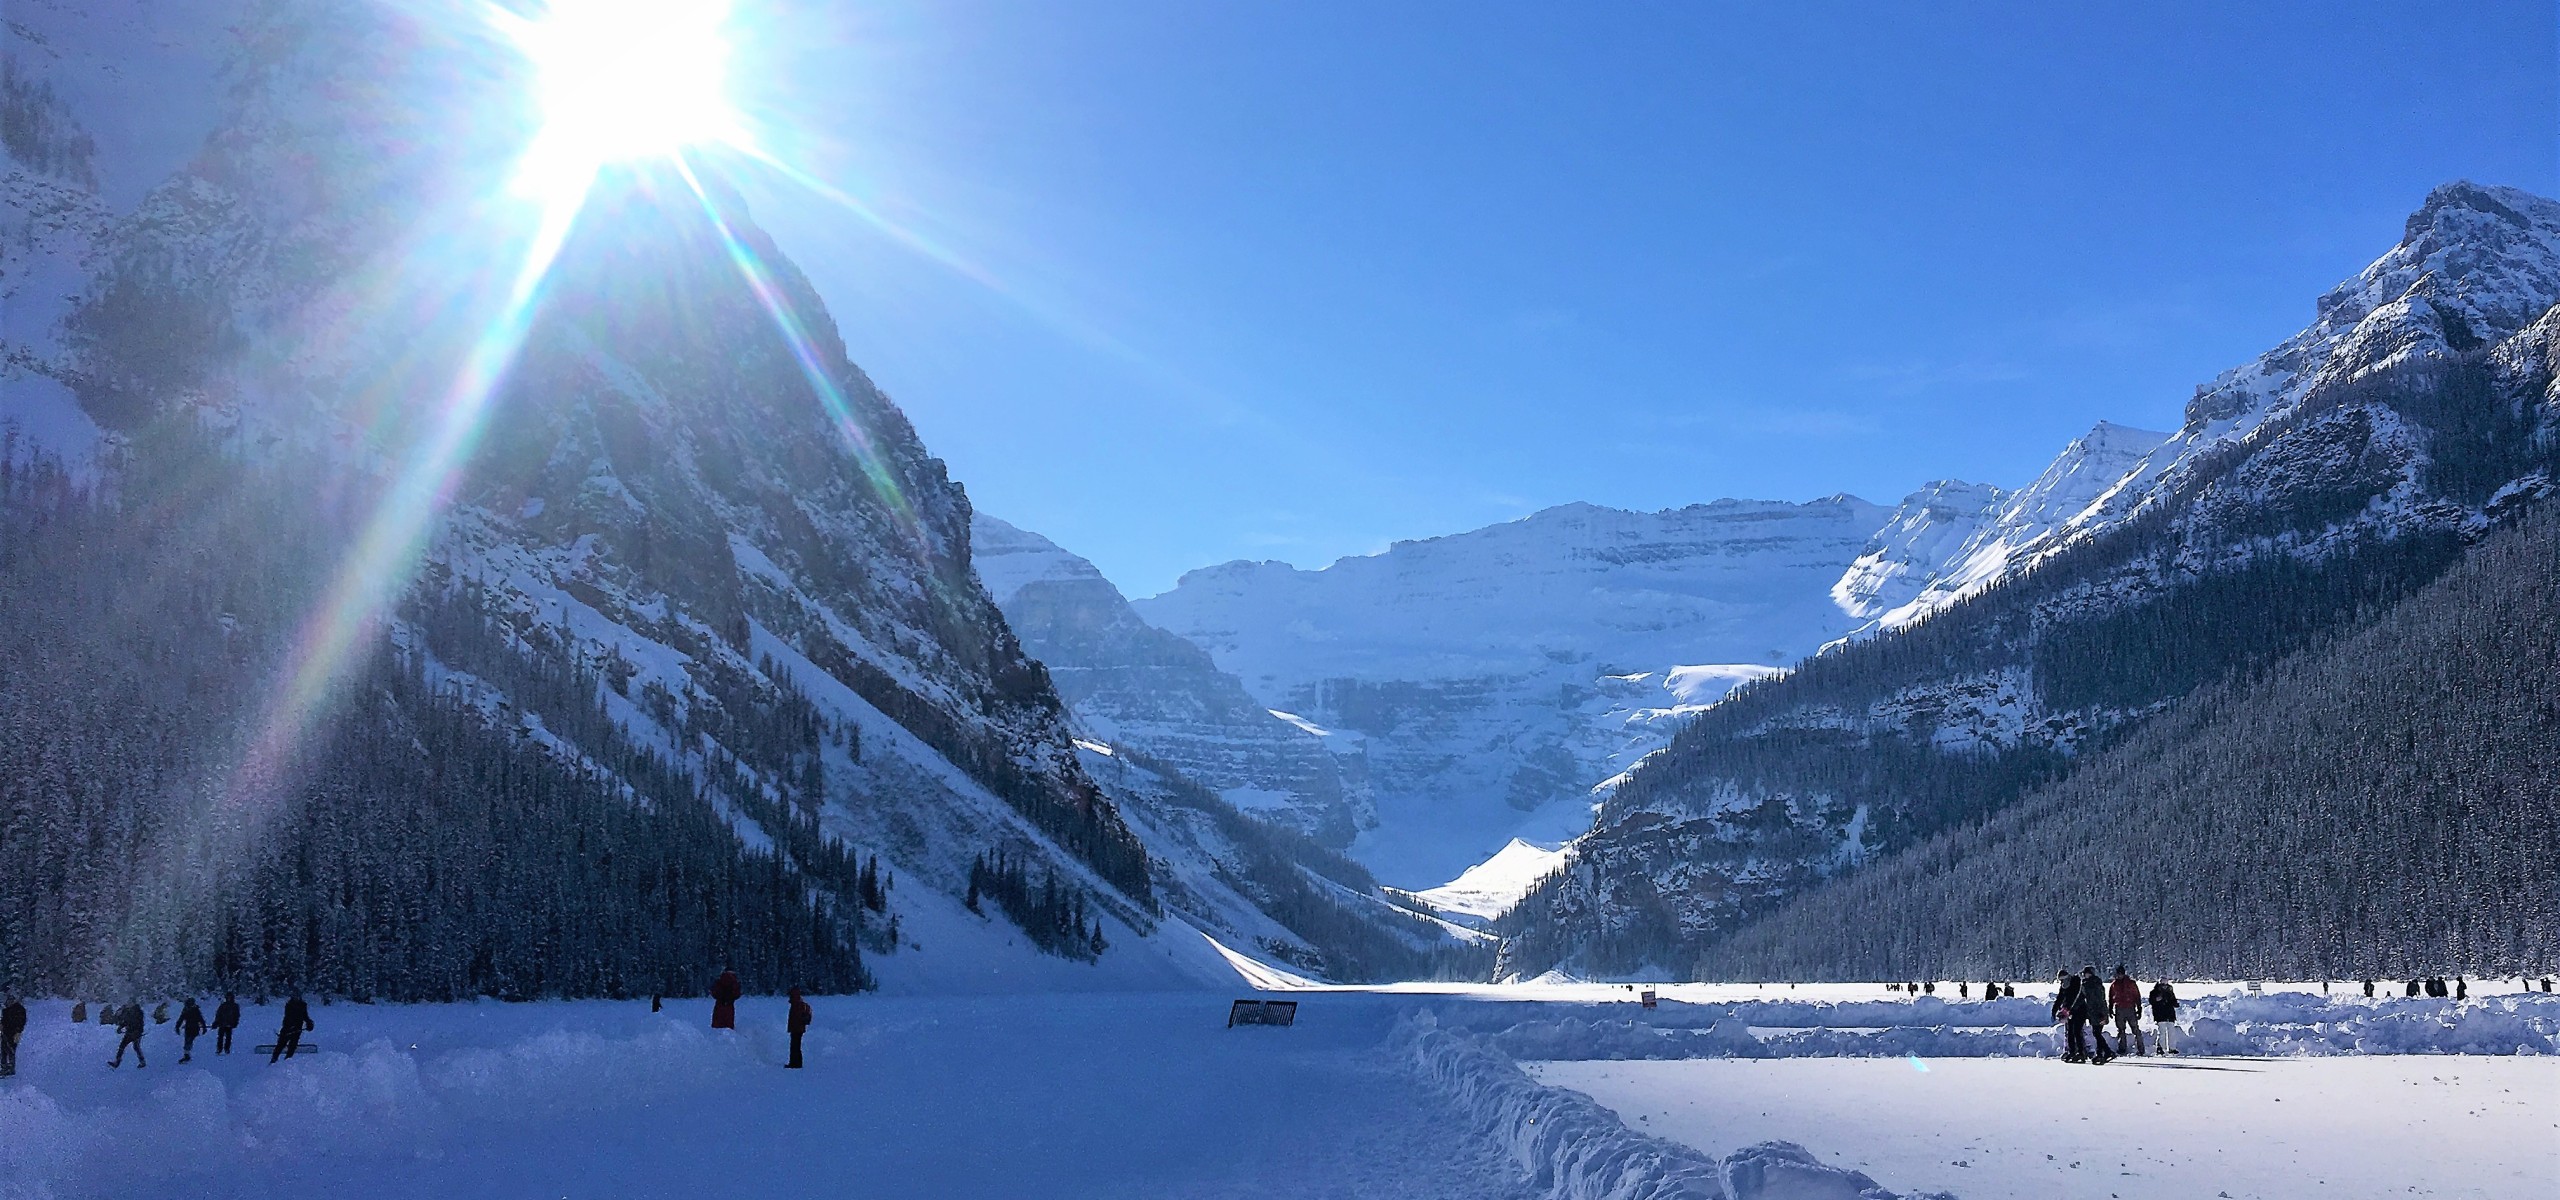 Winter in Banff and Lake Louise